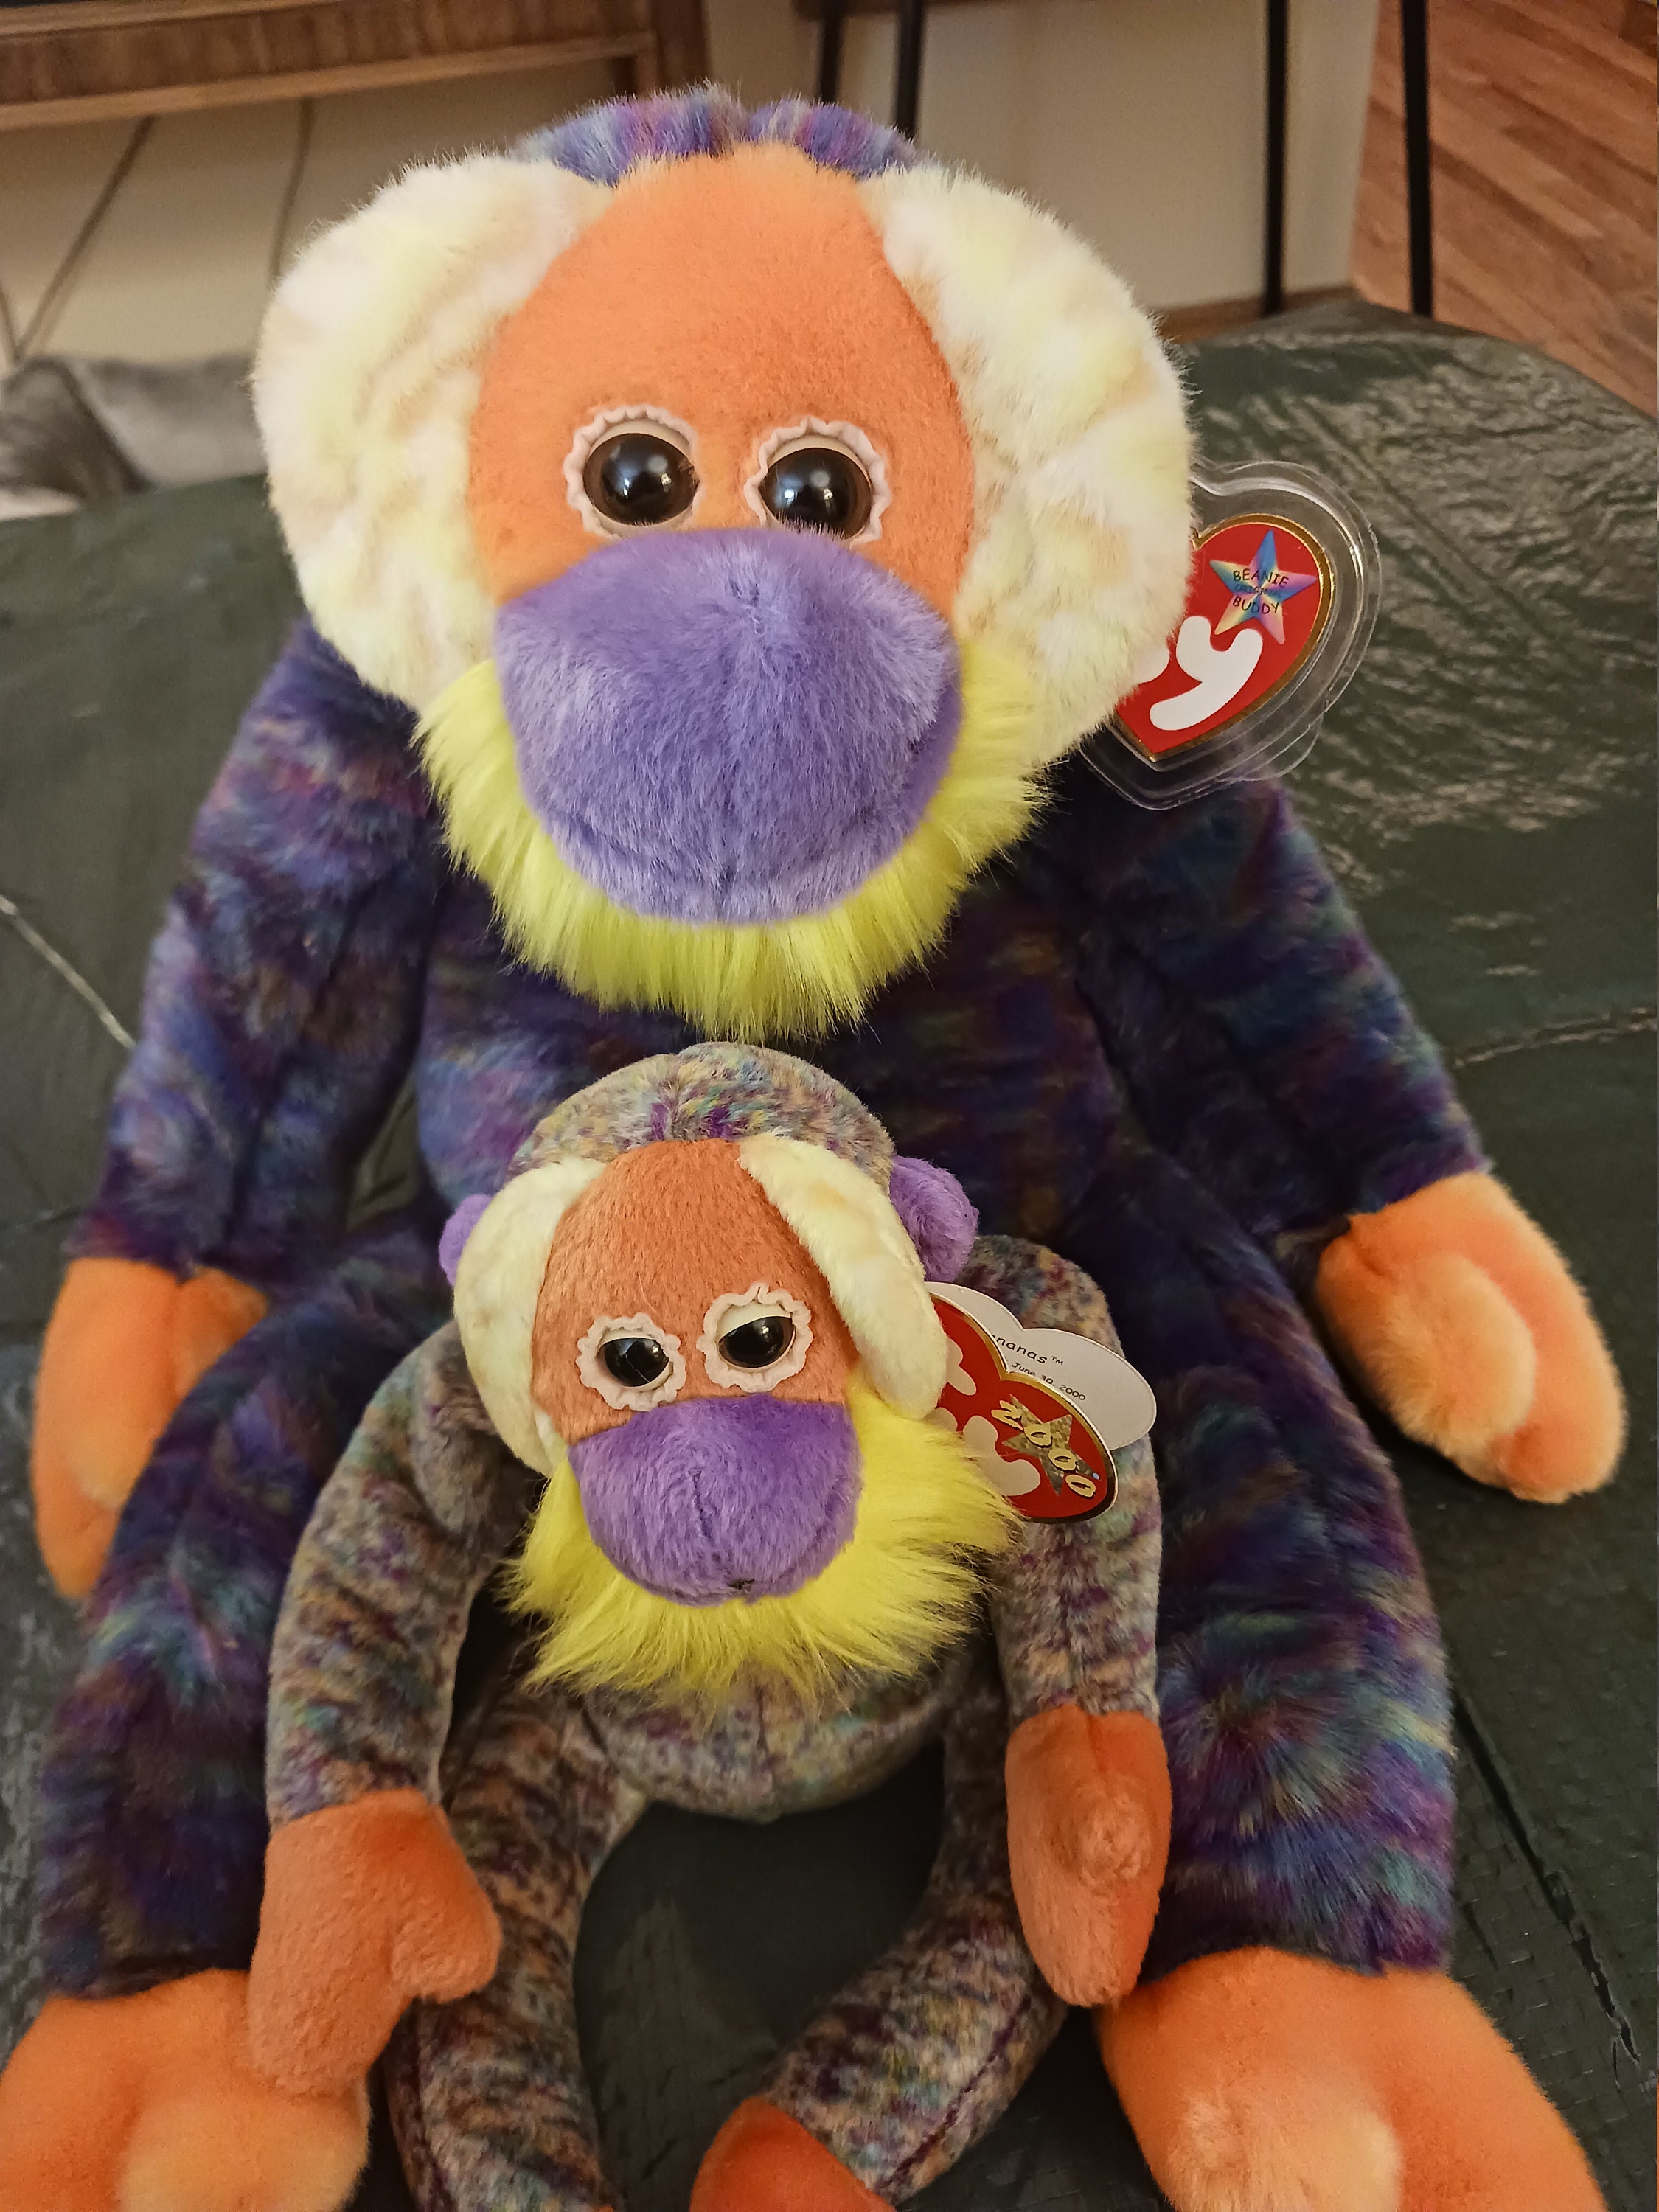 Ty 2001 Bananas The Orangutan Beanie Buddy With Tags Purple Orange Yellow 14 in for sale online 